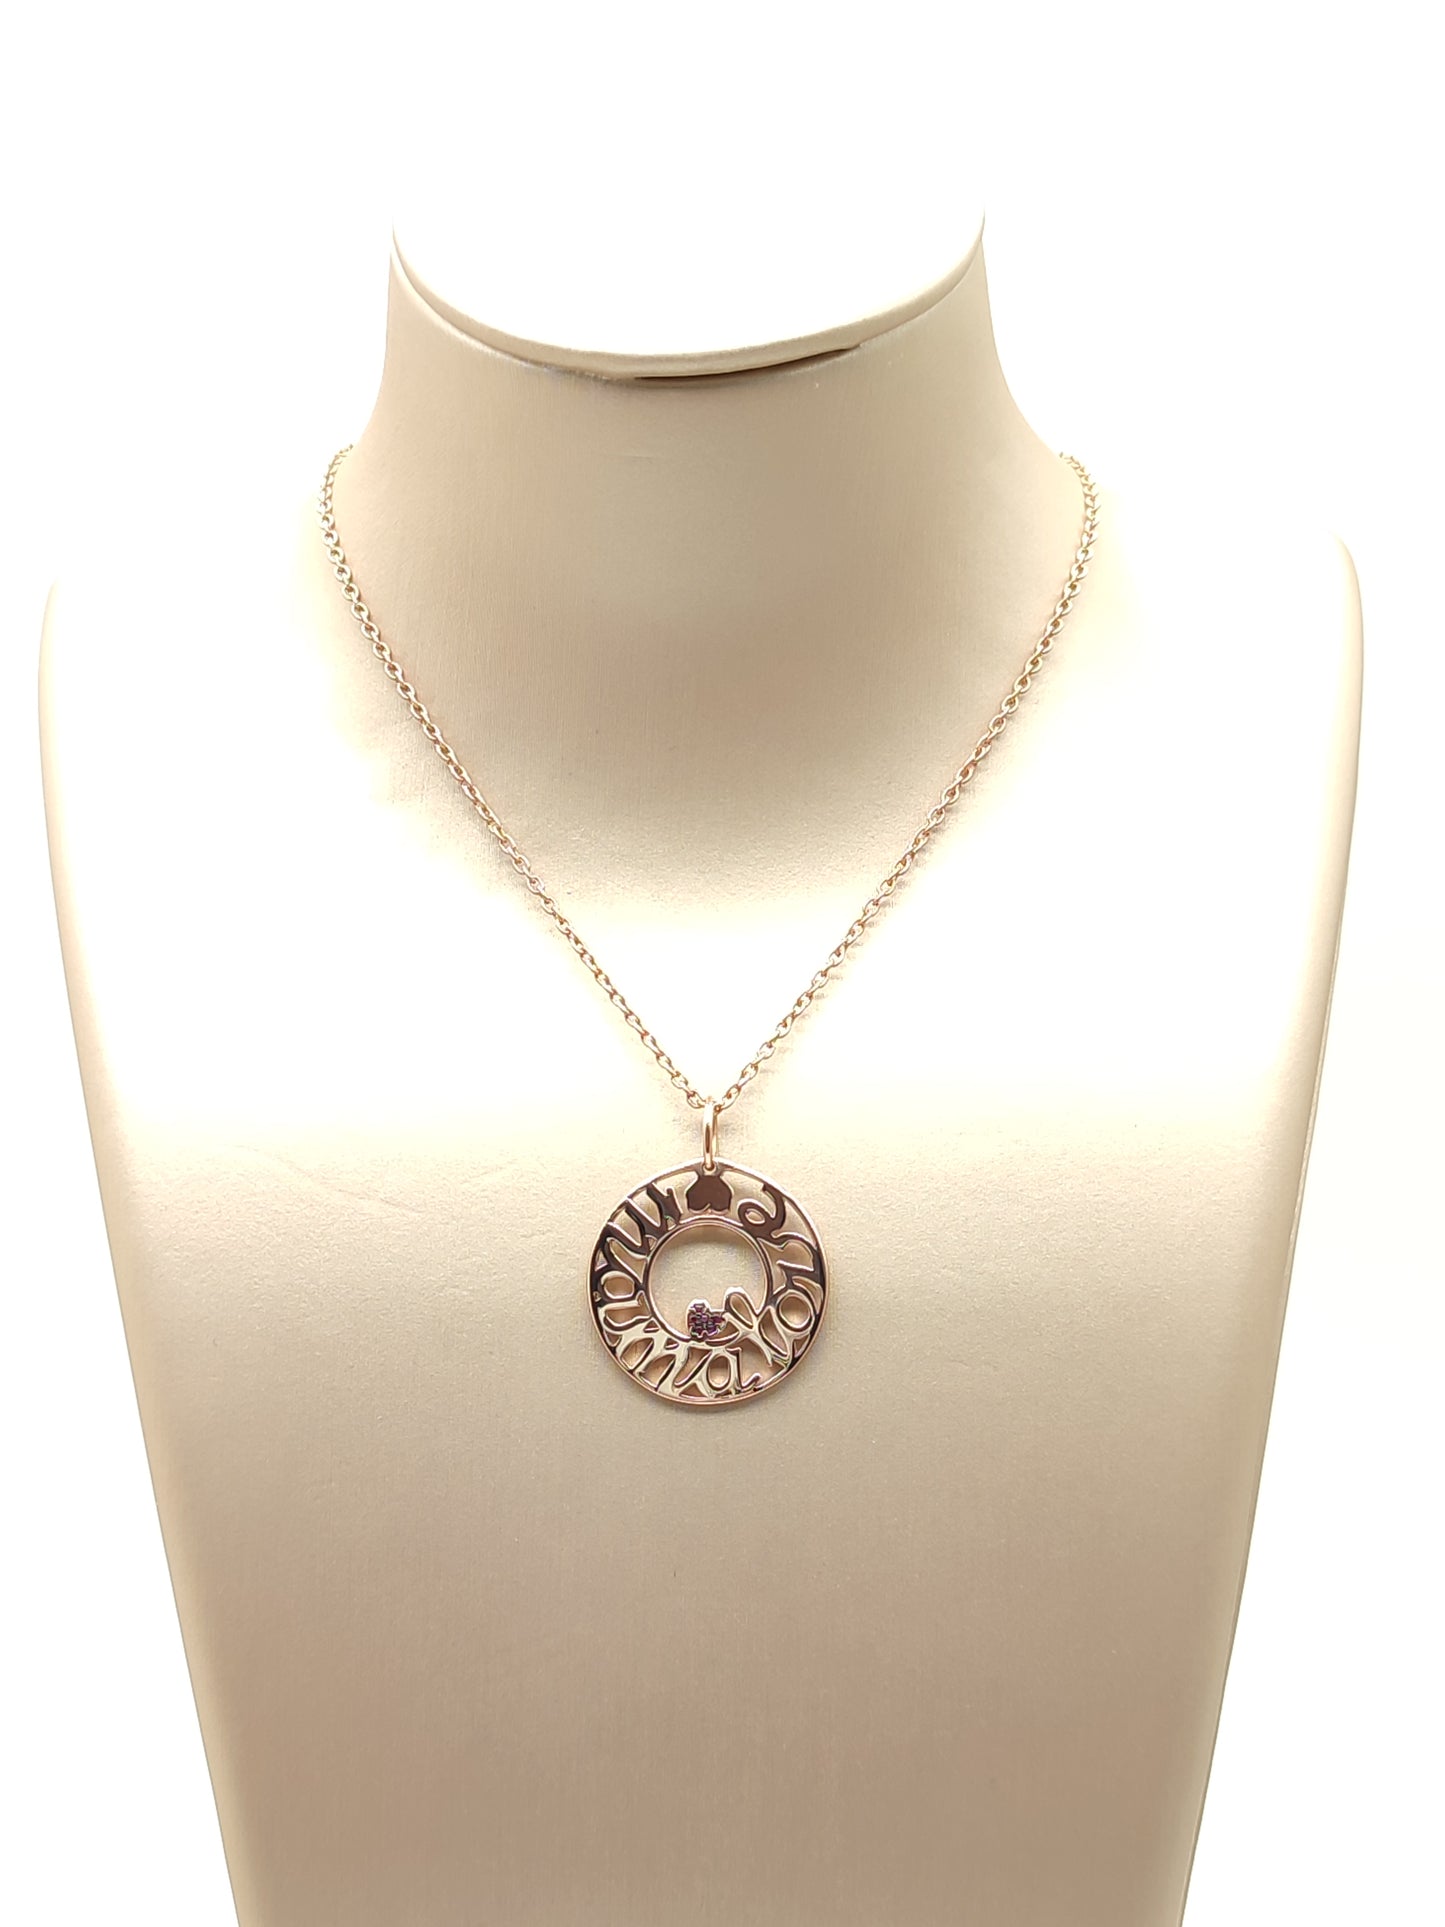 Tous mama love necklace with rubies